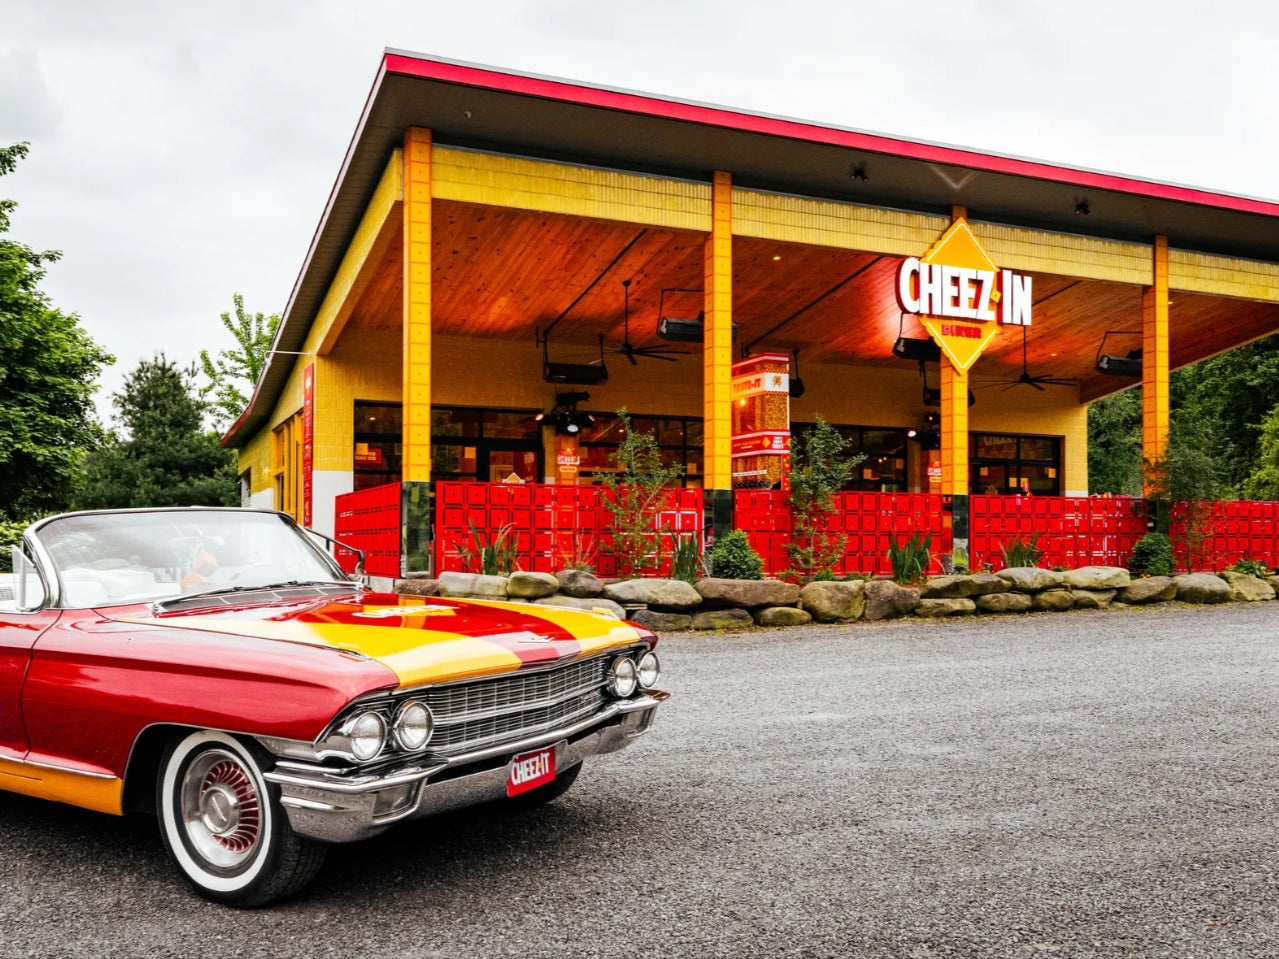 The Cheez-In Diner in Woodstock, New York (Cheez-It)